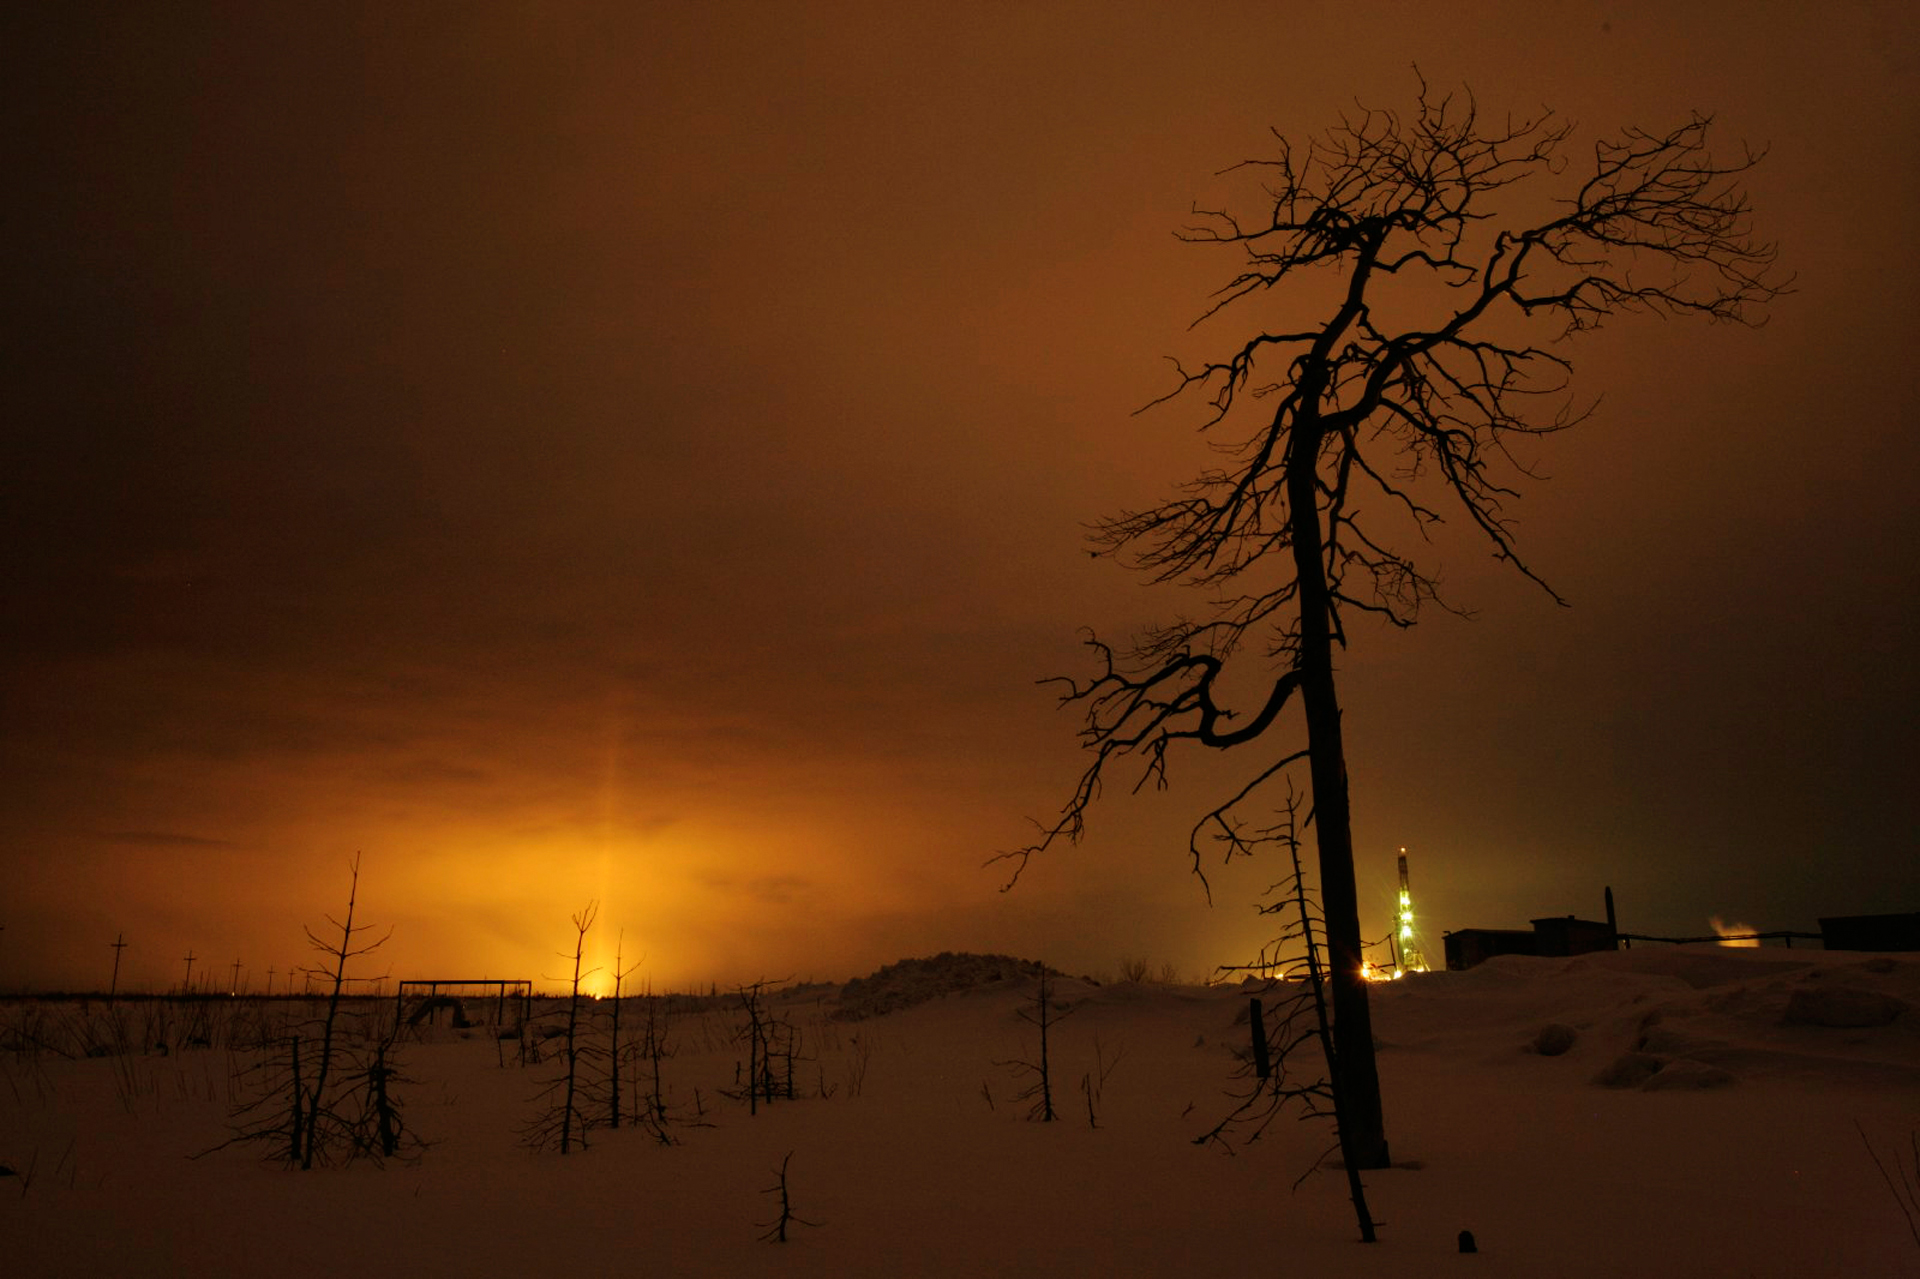  Gas flares and rig lights sear the night sky. Russia is now the world's top producer of crude oil.  Savuiskoye oil field, Russia  